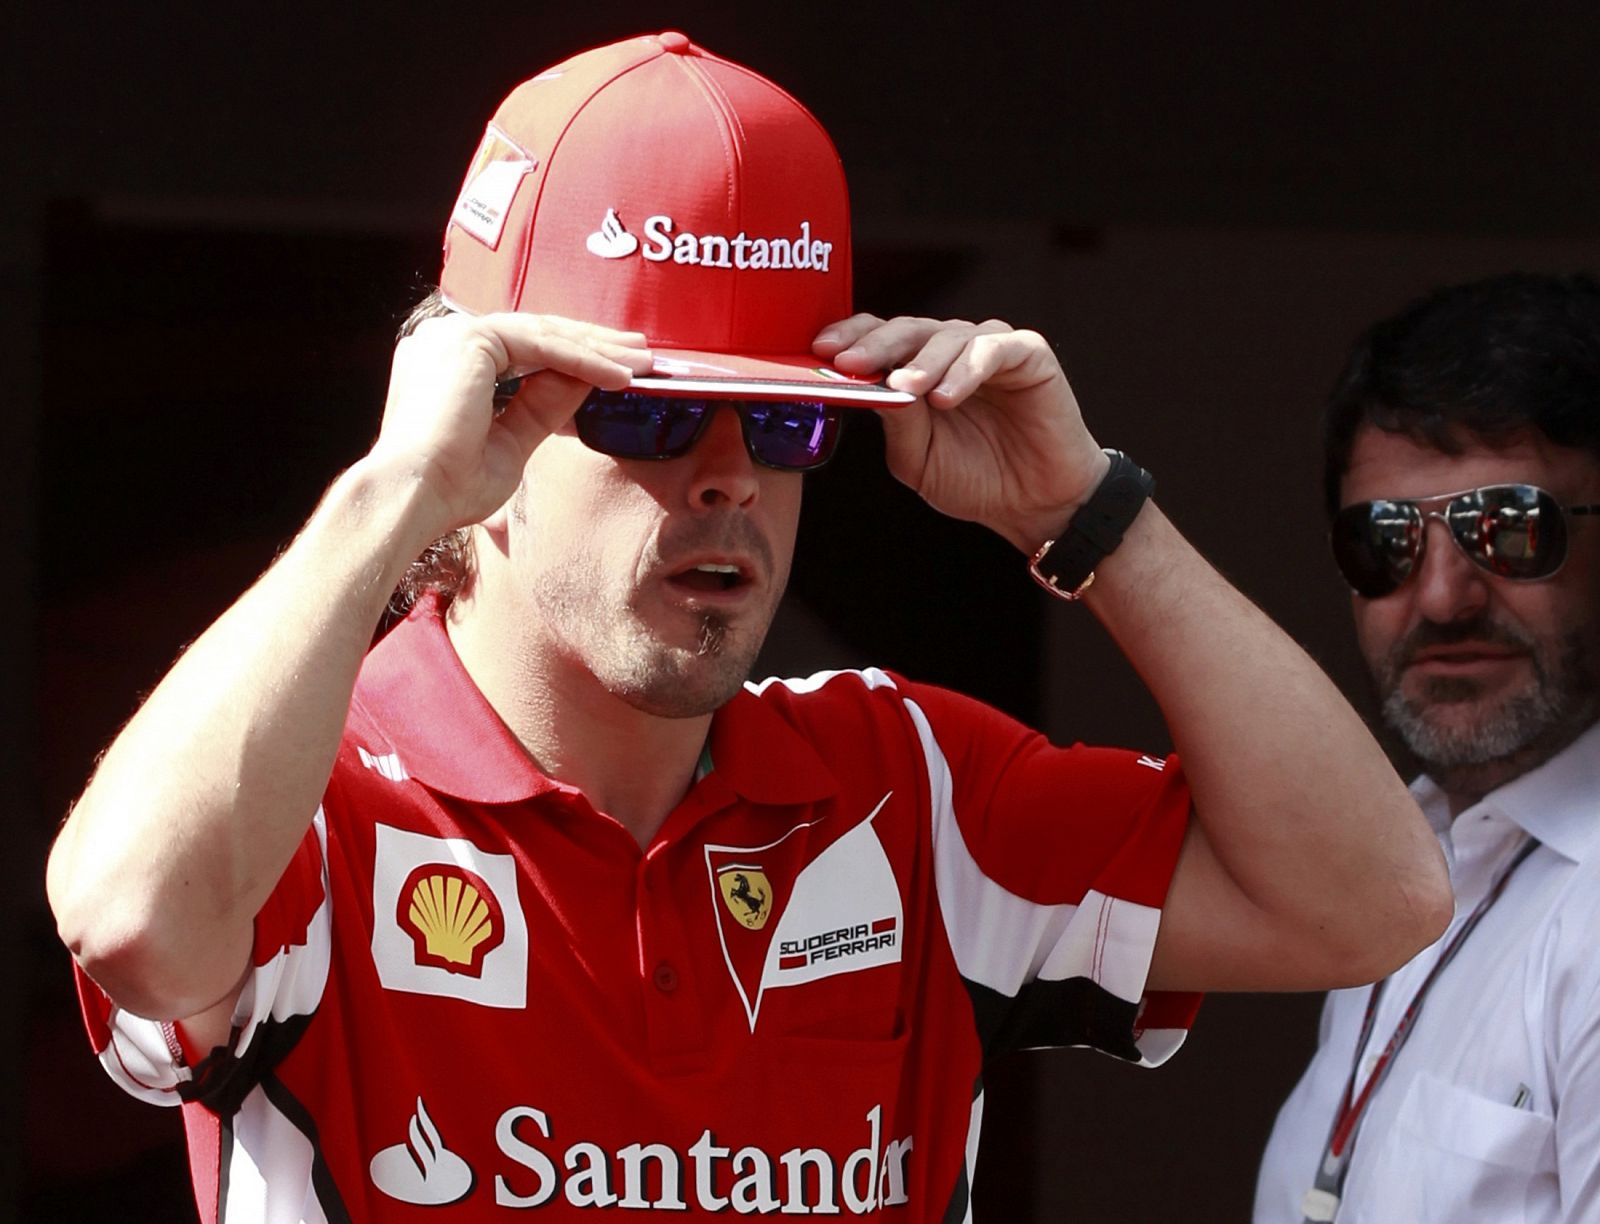 Ferrari Formula One driver Alonso puts on his cap in his team motorhome before the Australian F1 Grand Prix at the Albert Park circuit in Melbourne